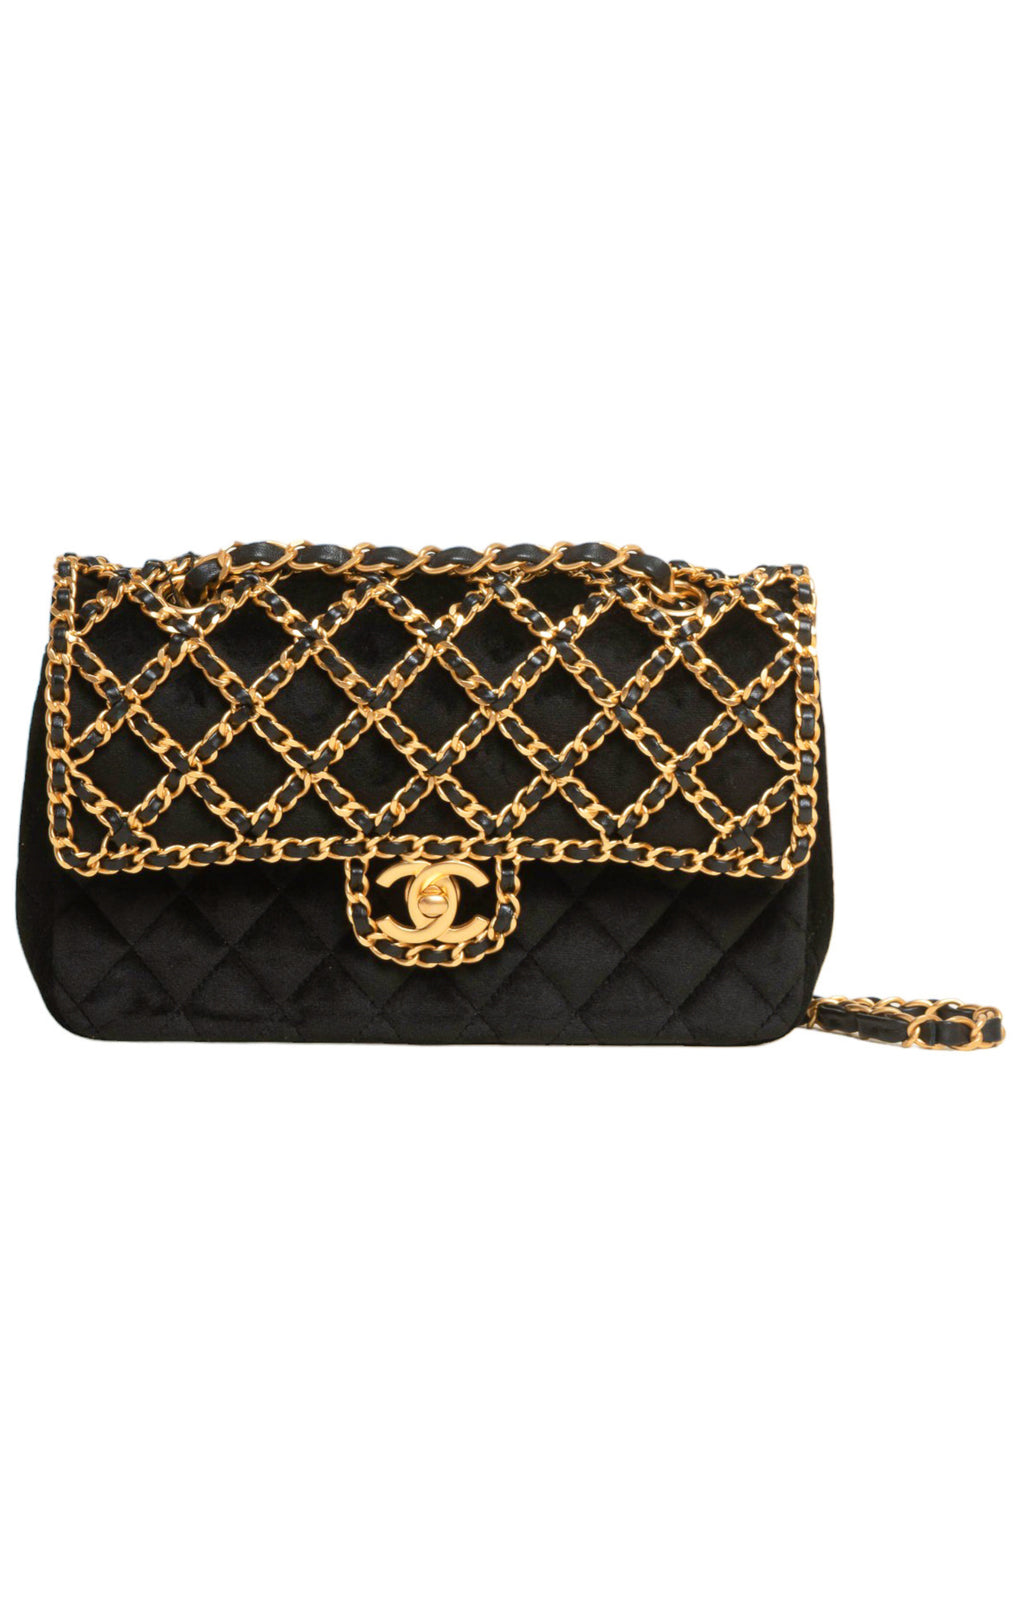 CHANEL (RARE & NEW) with tags Bag Size: 9" x 2.25" x 5.5"; 18" strap